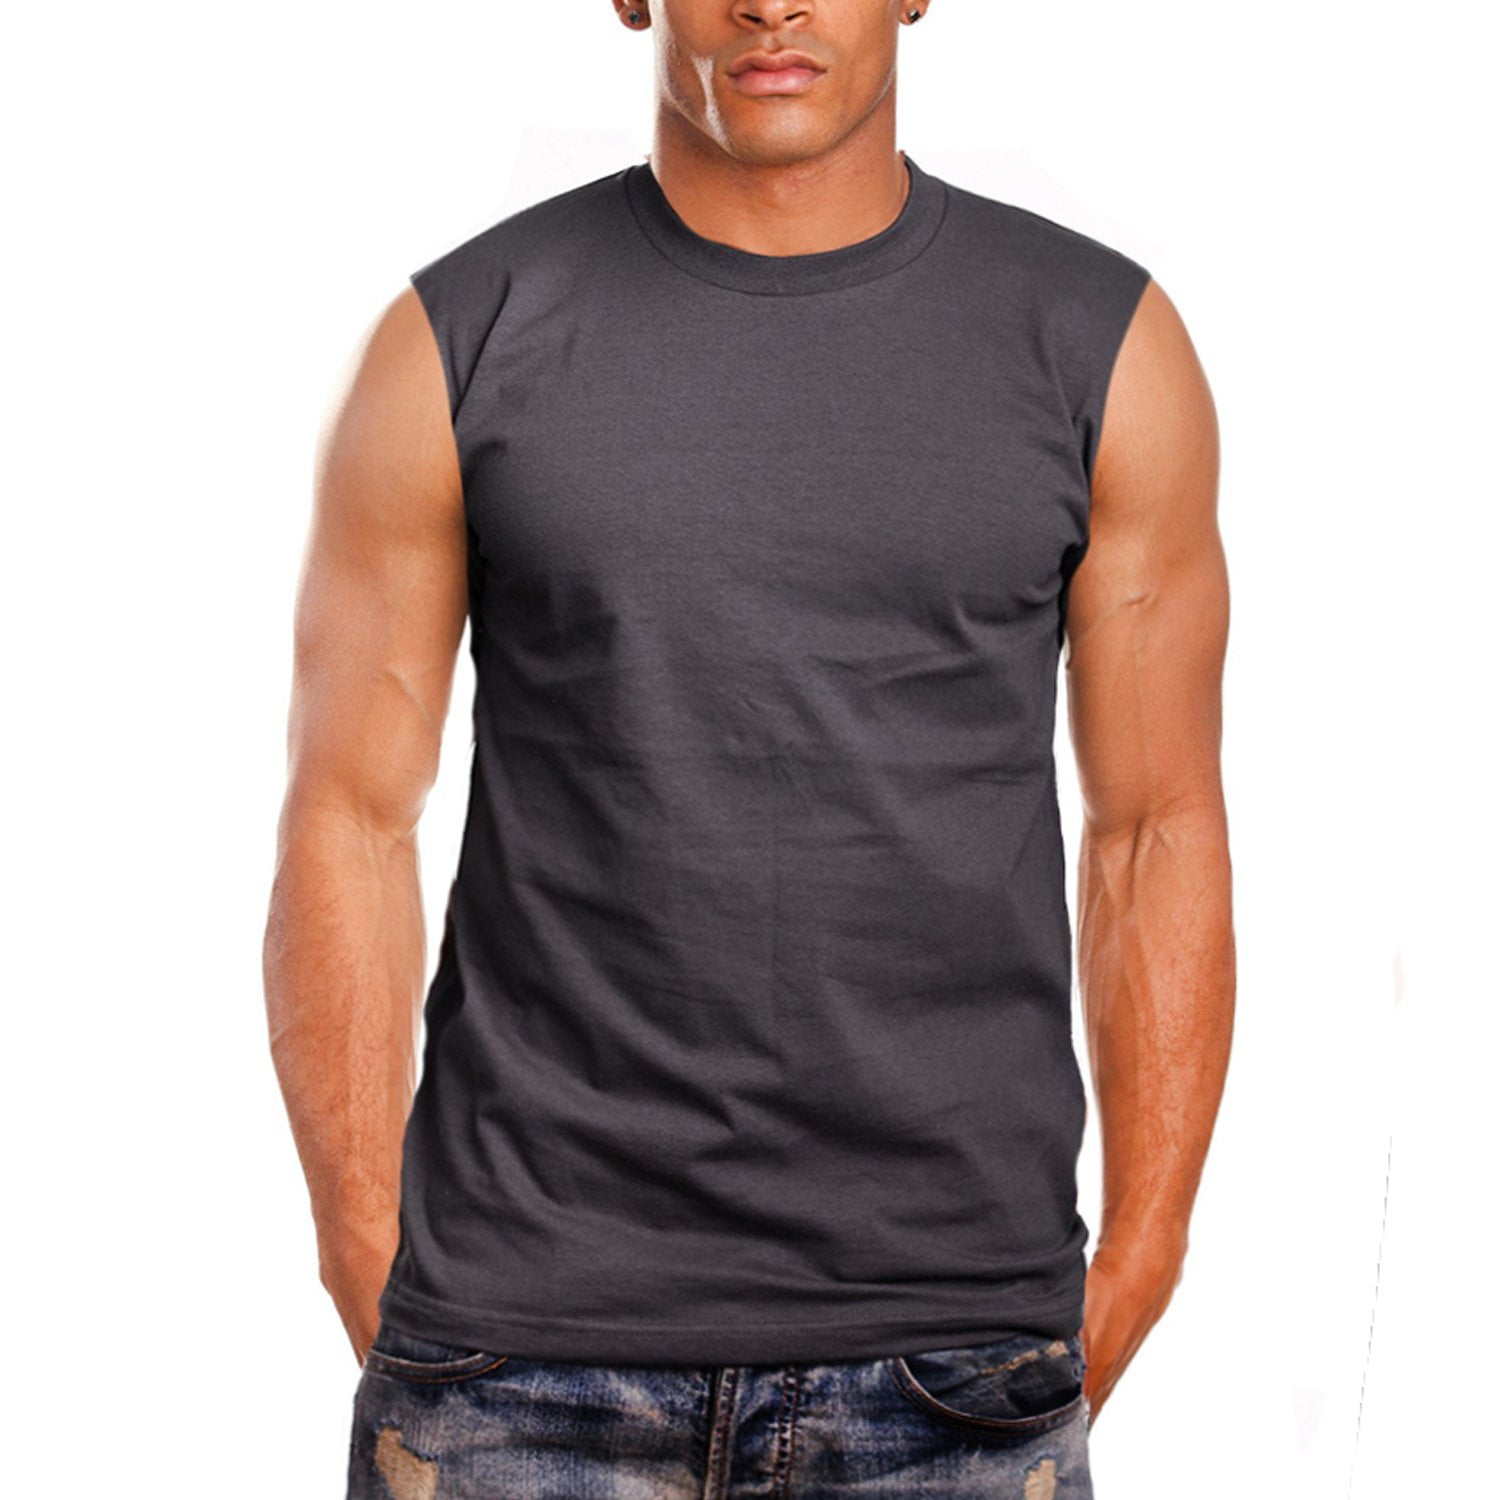 I agree Swamp poverty Muscle Sleeveless Workout Shirts Tank Tops for Men | Athletic Gym  Bodybuilding Training Compression Tops - 100% Cotton (Small, Black) -  Walmart.com